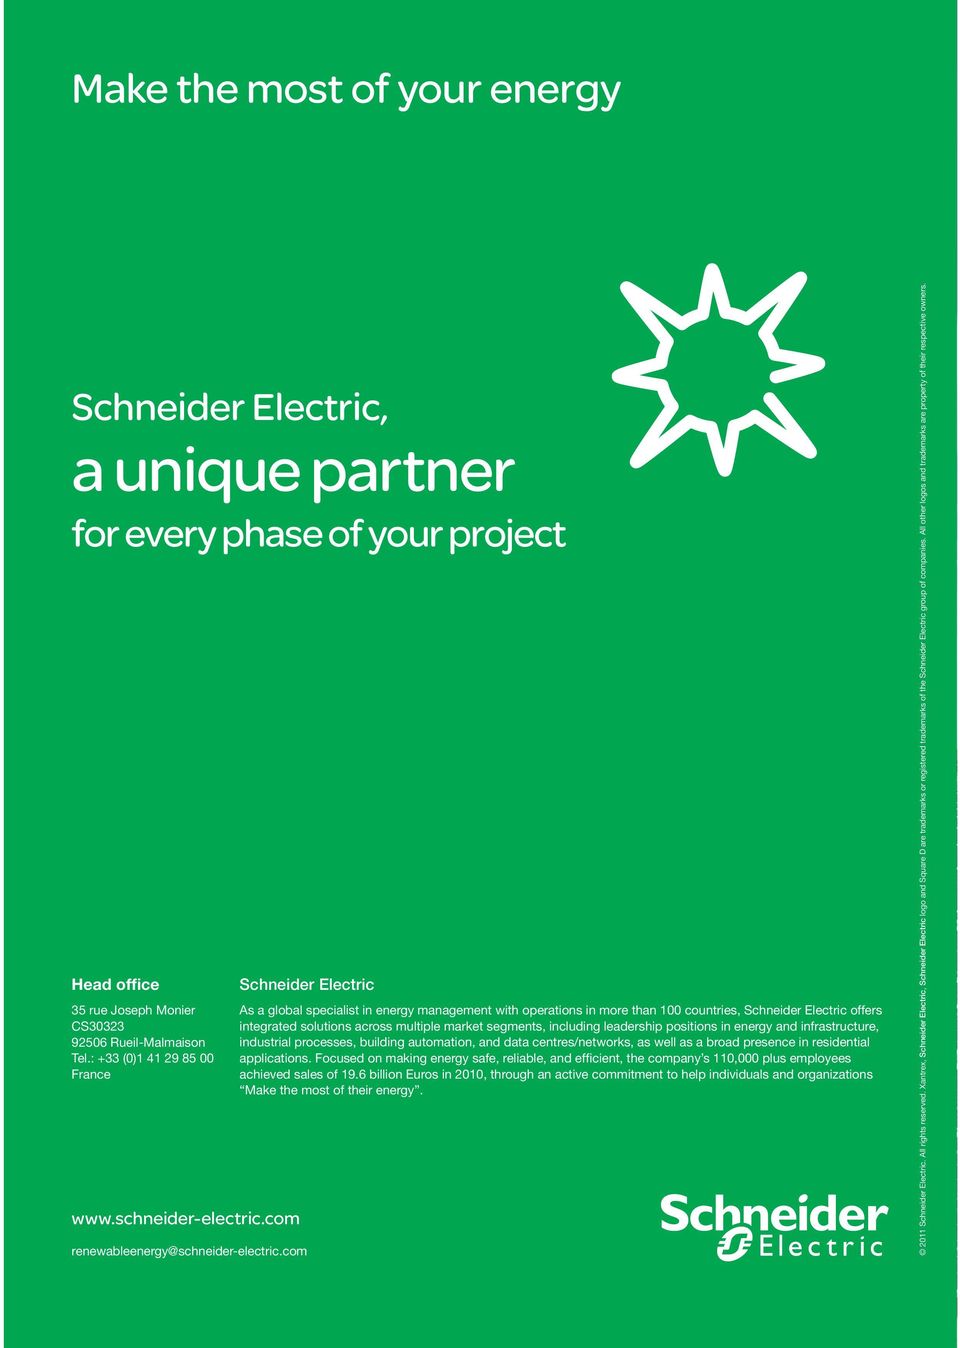 com Schneider Electric As a global specialist in energy management with operations in more than 100 countries, Schneider Electric offers integrated solutions across multiple market segments,